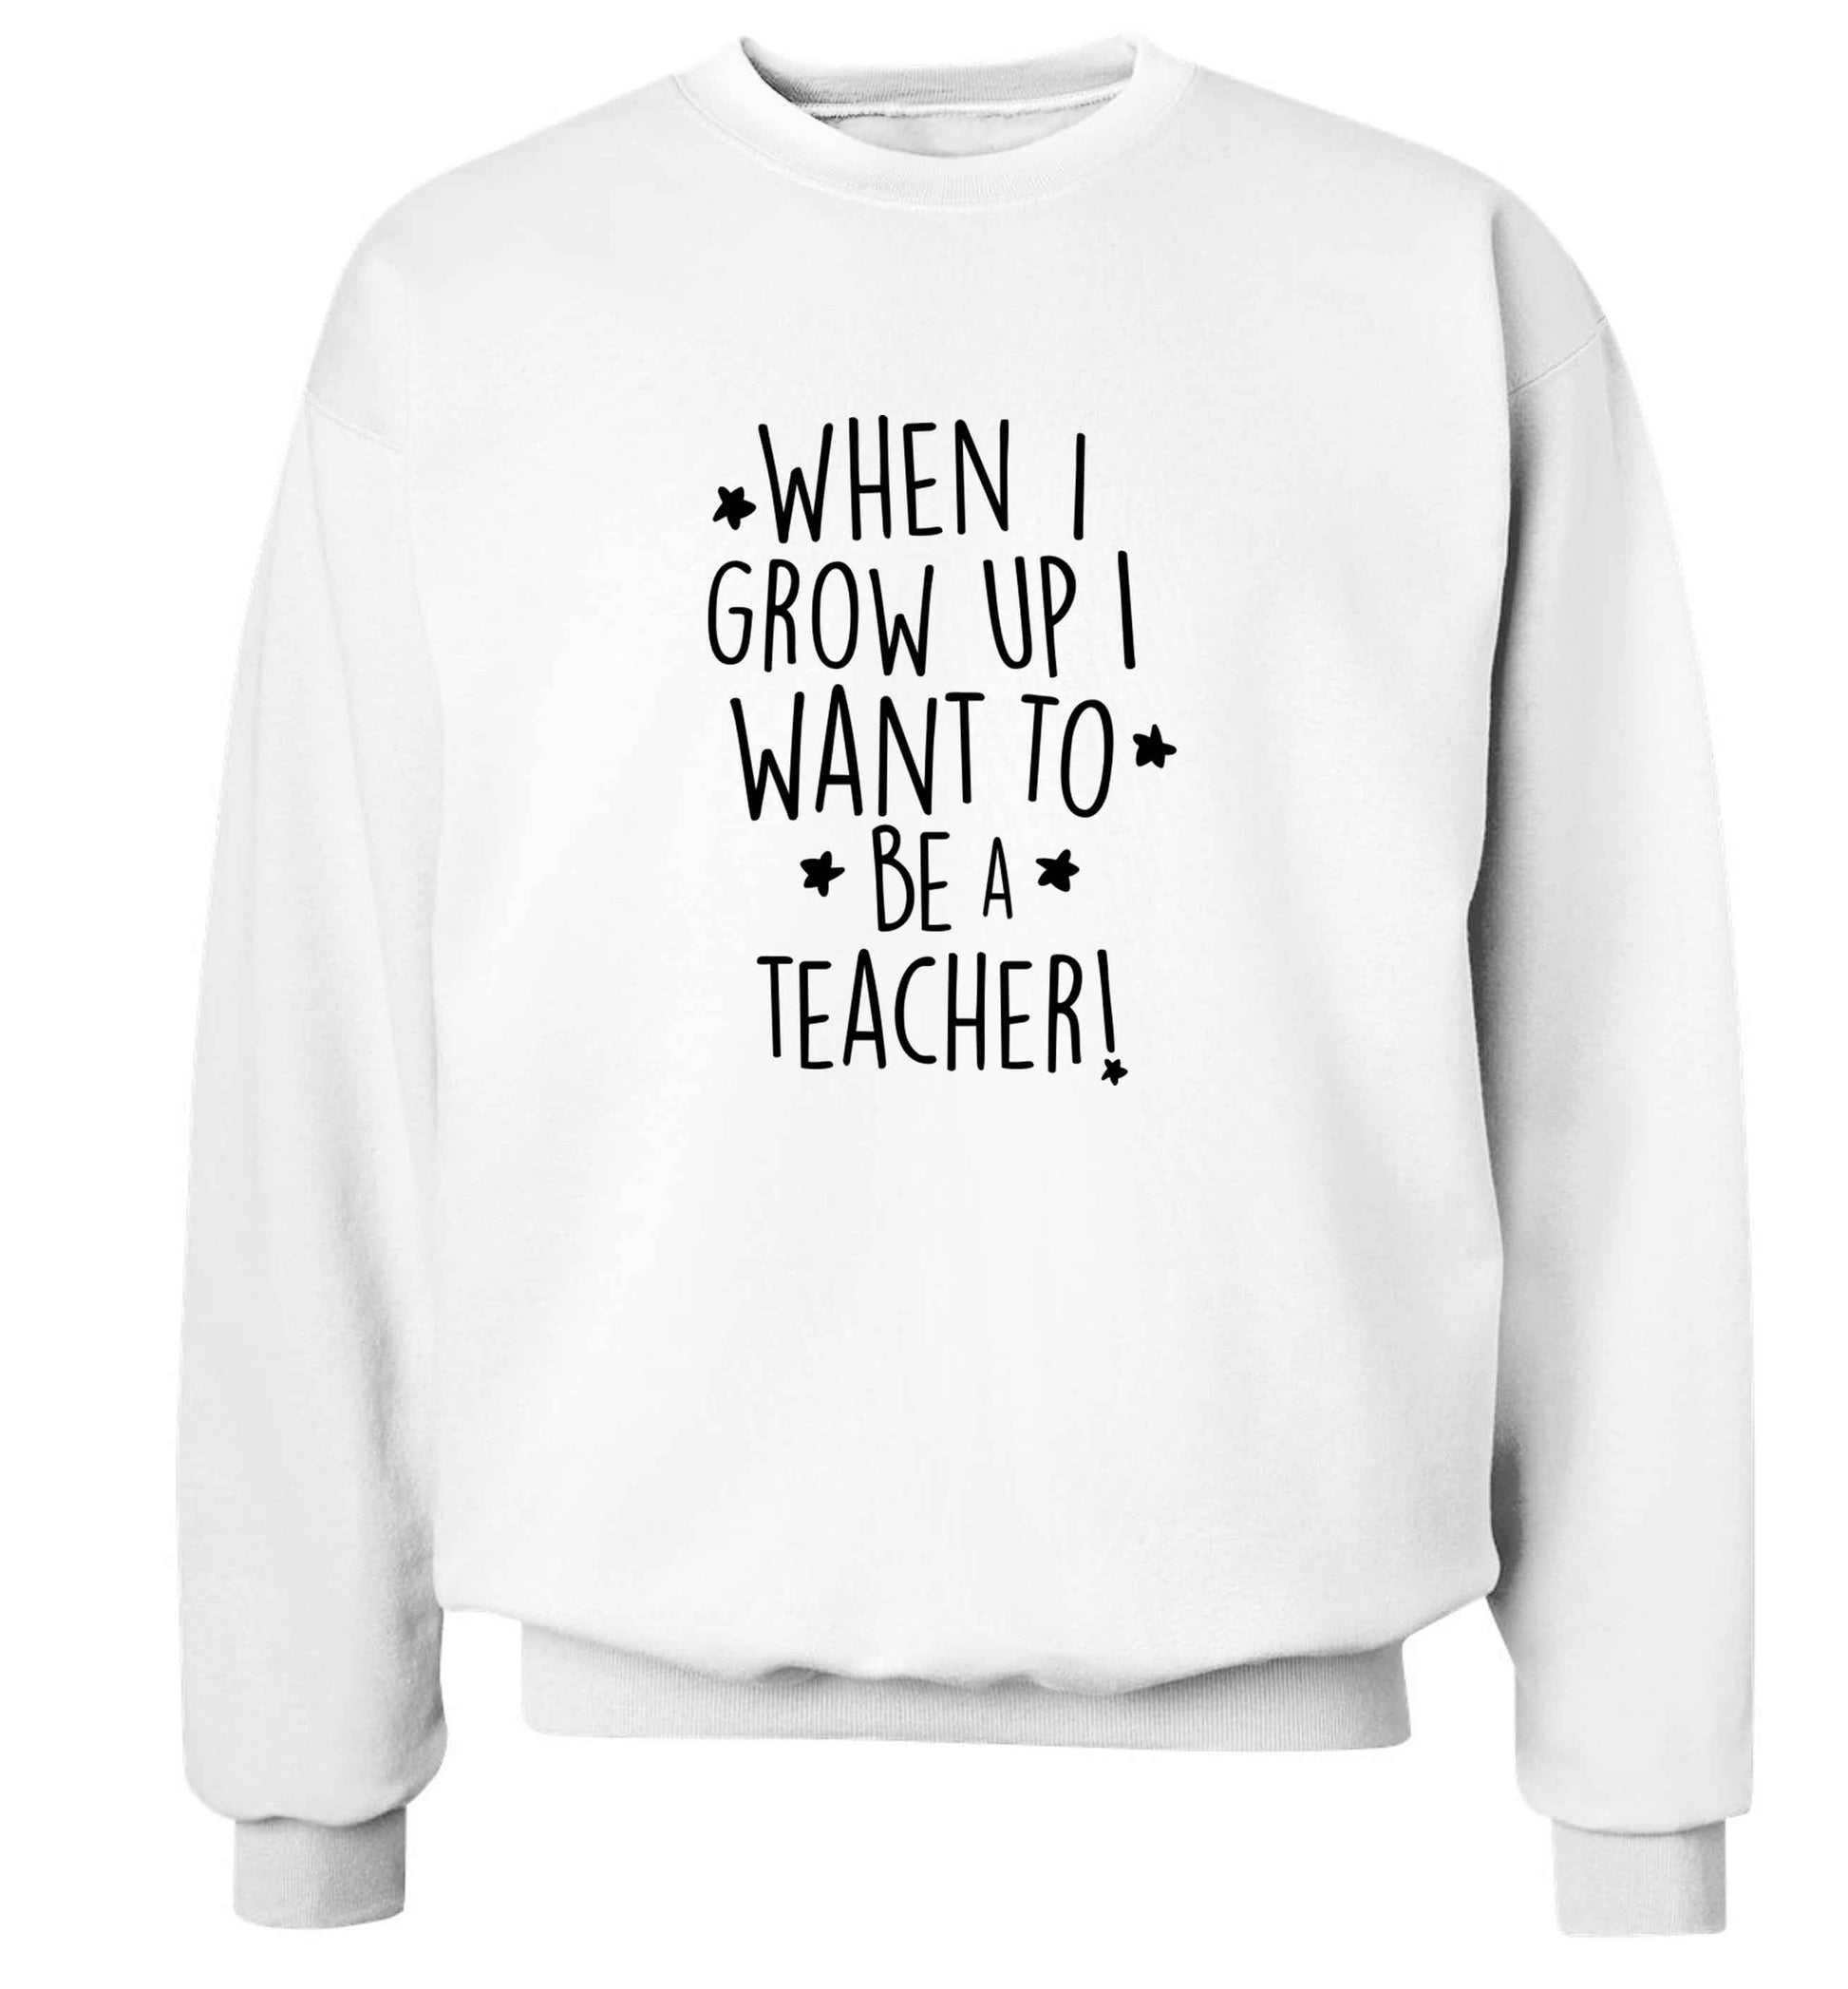 When I grow up I want to be a teacher adult's unisex white sweater 2XL